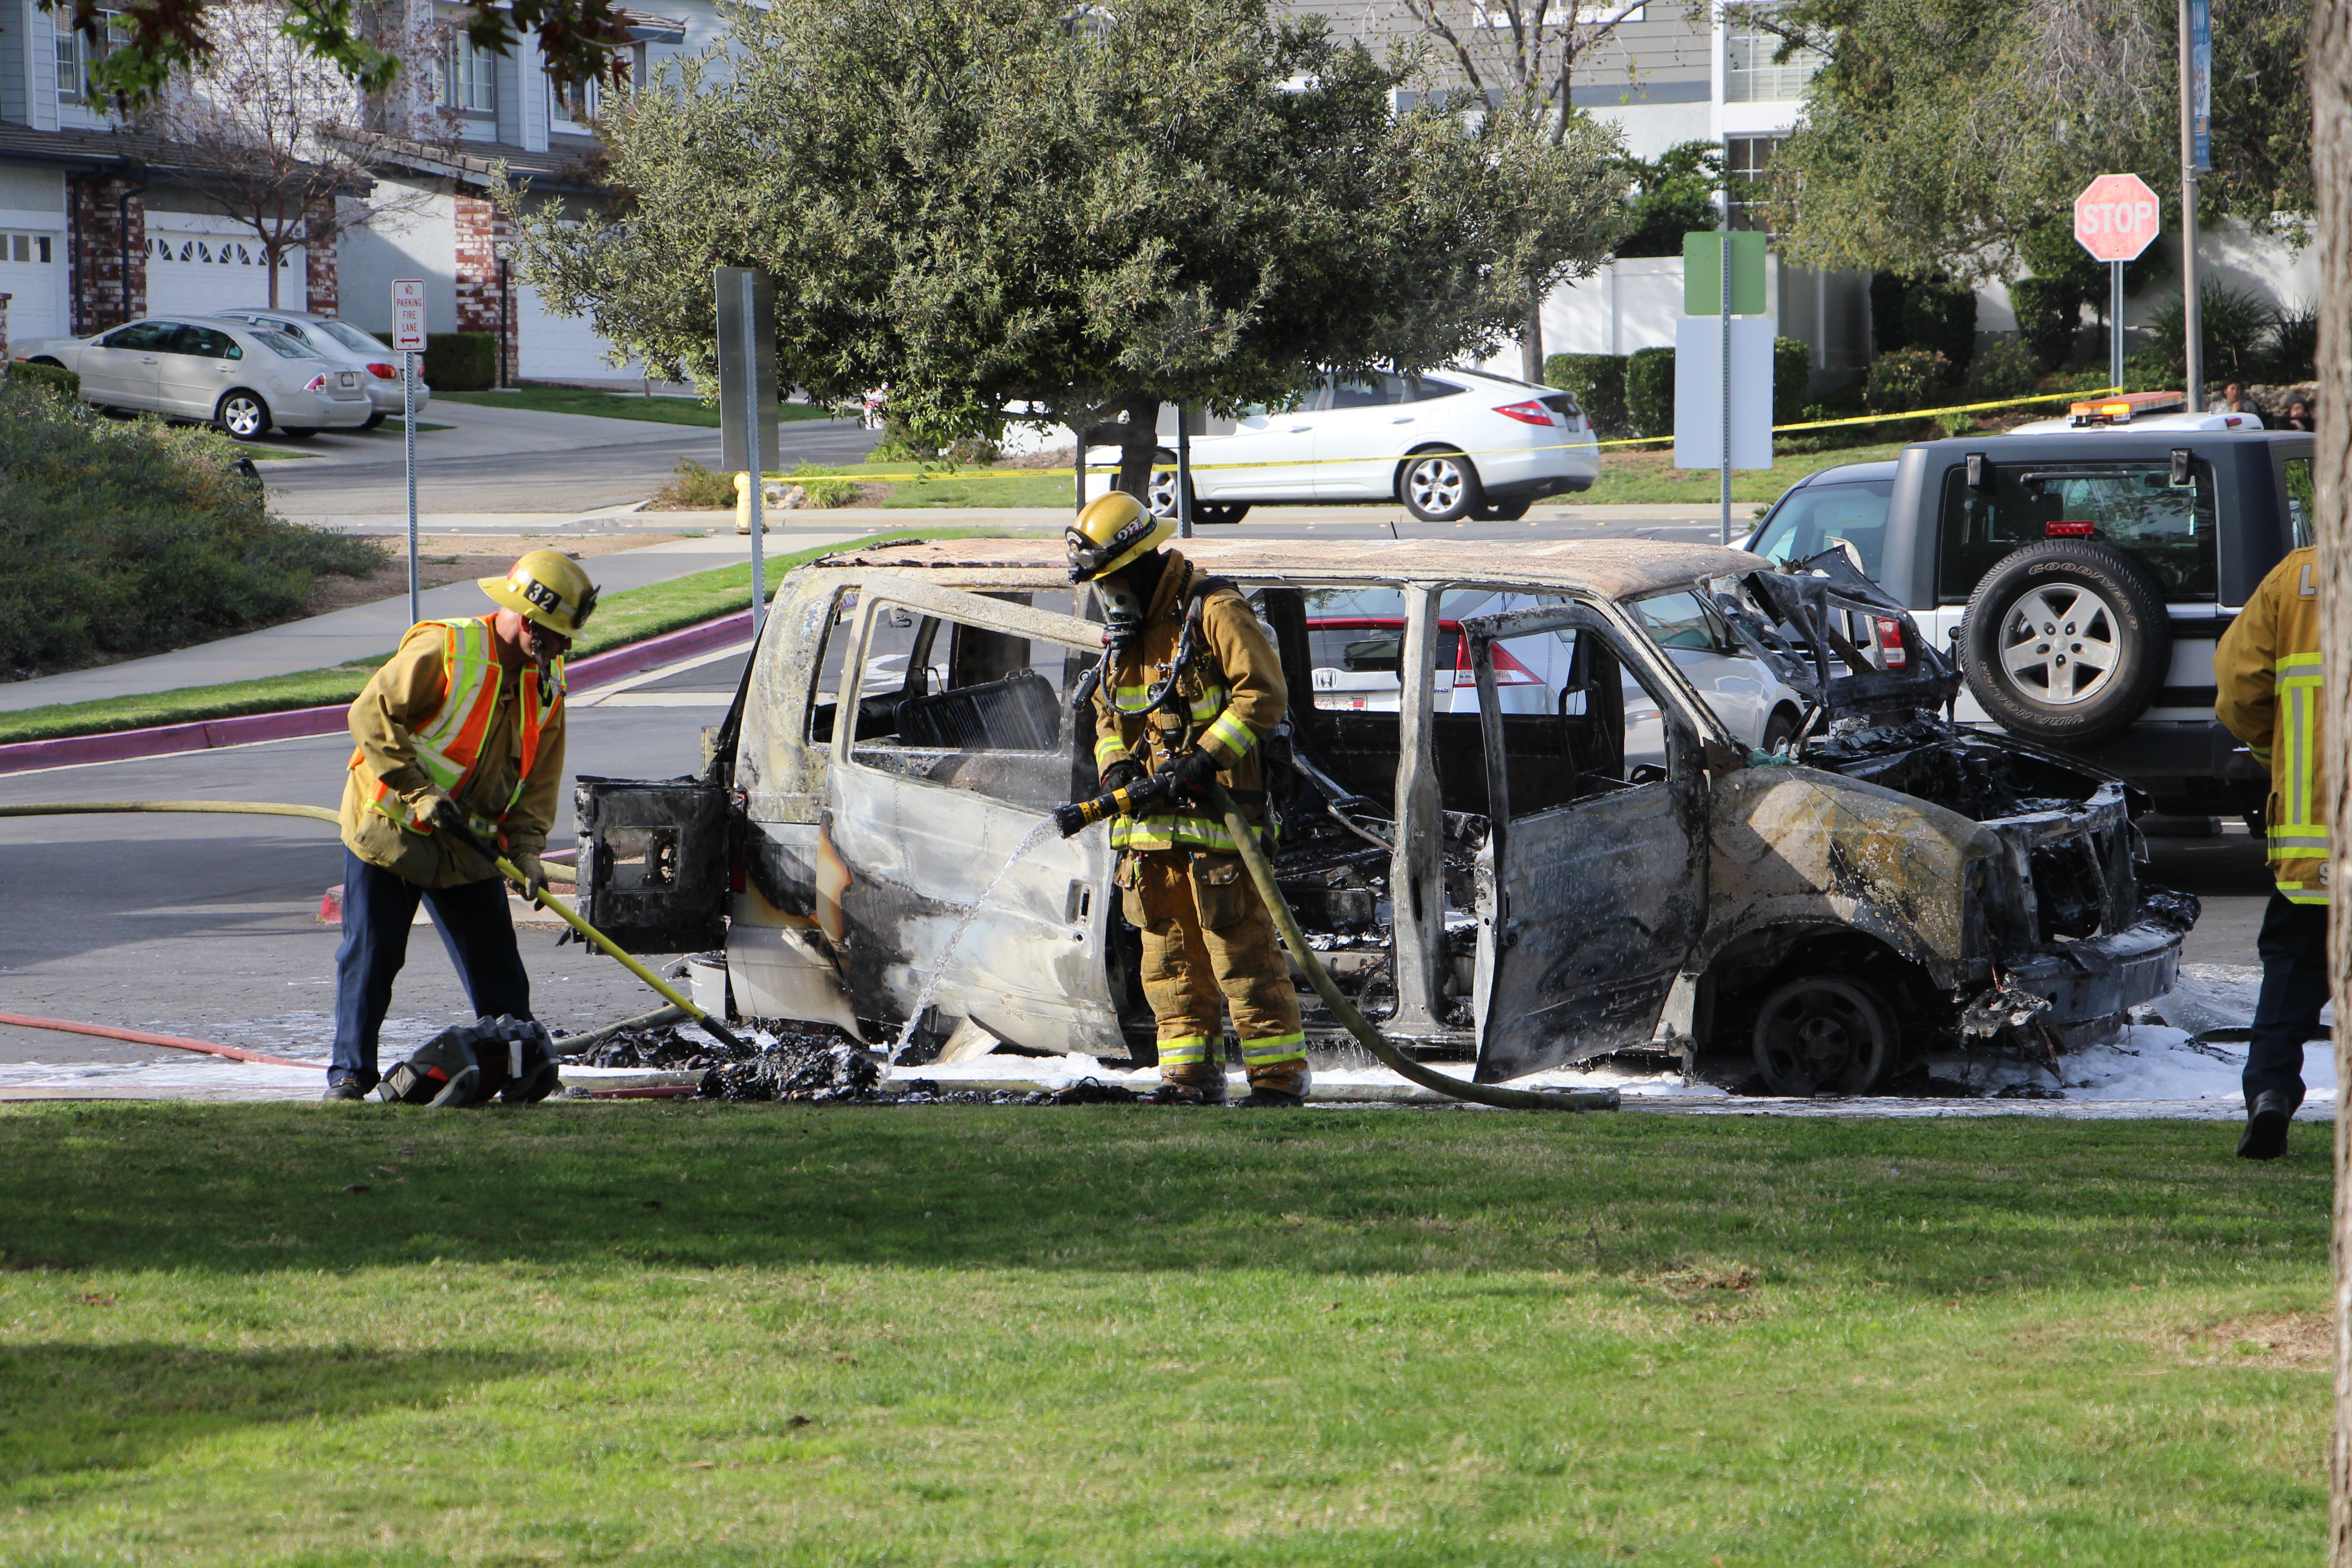 Fire department battles vehicle fire in Administration parking lot